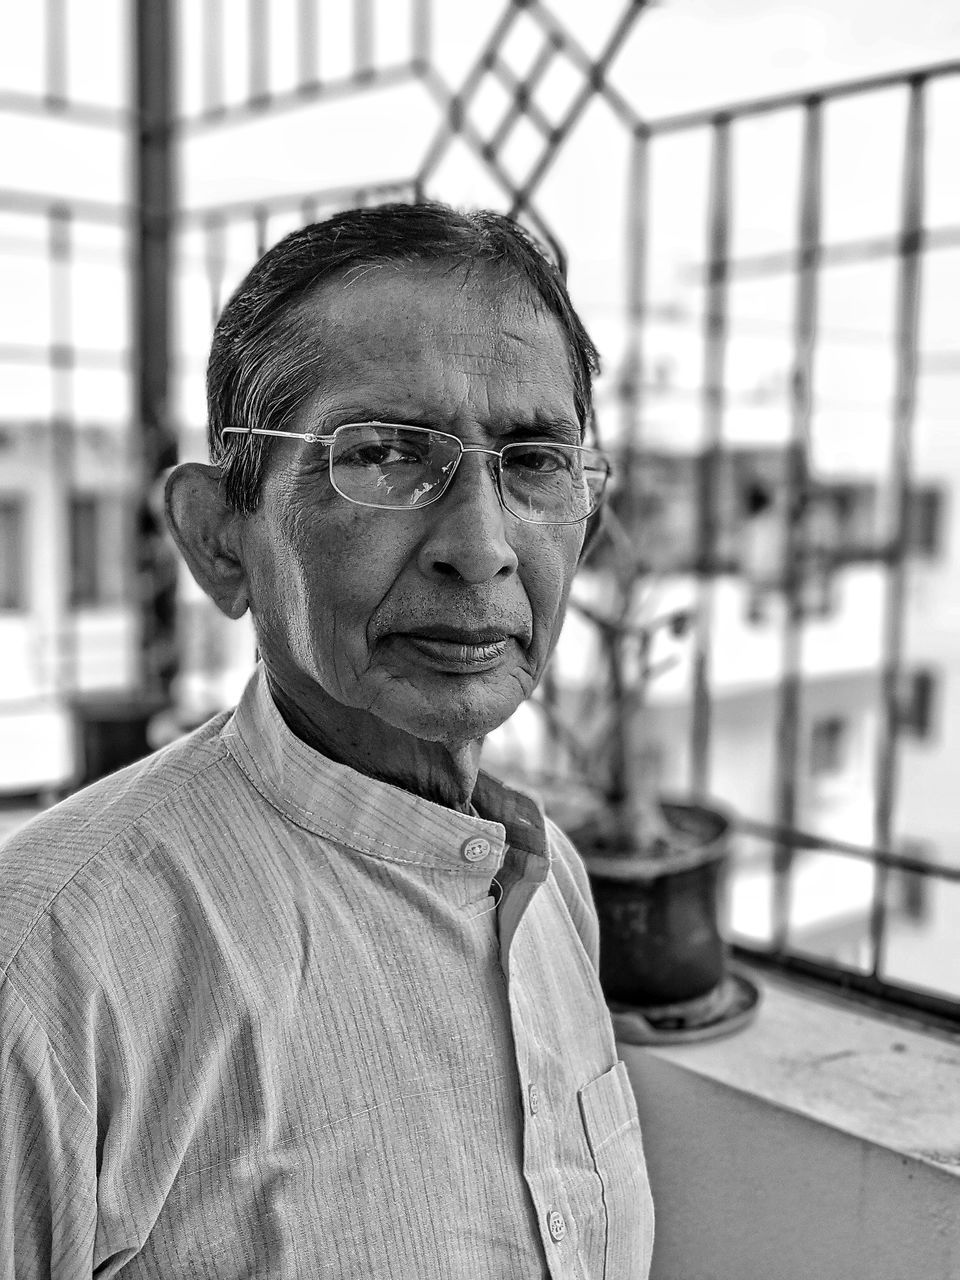 adult, one person, portrait, black and white, glasses, eyeglasses, senior adult, men, person, monochrome, monochrome photography, mature adult, architecture, lifestyles, headshot, focus on foreground, seniors, looking at camera, day, looking, casual clothing, indoors, human face, standing